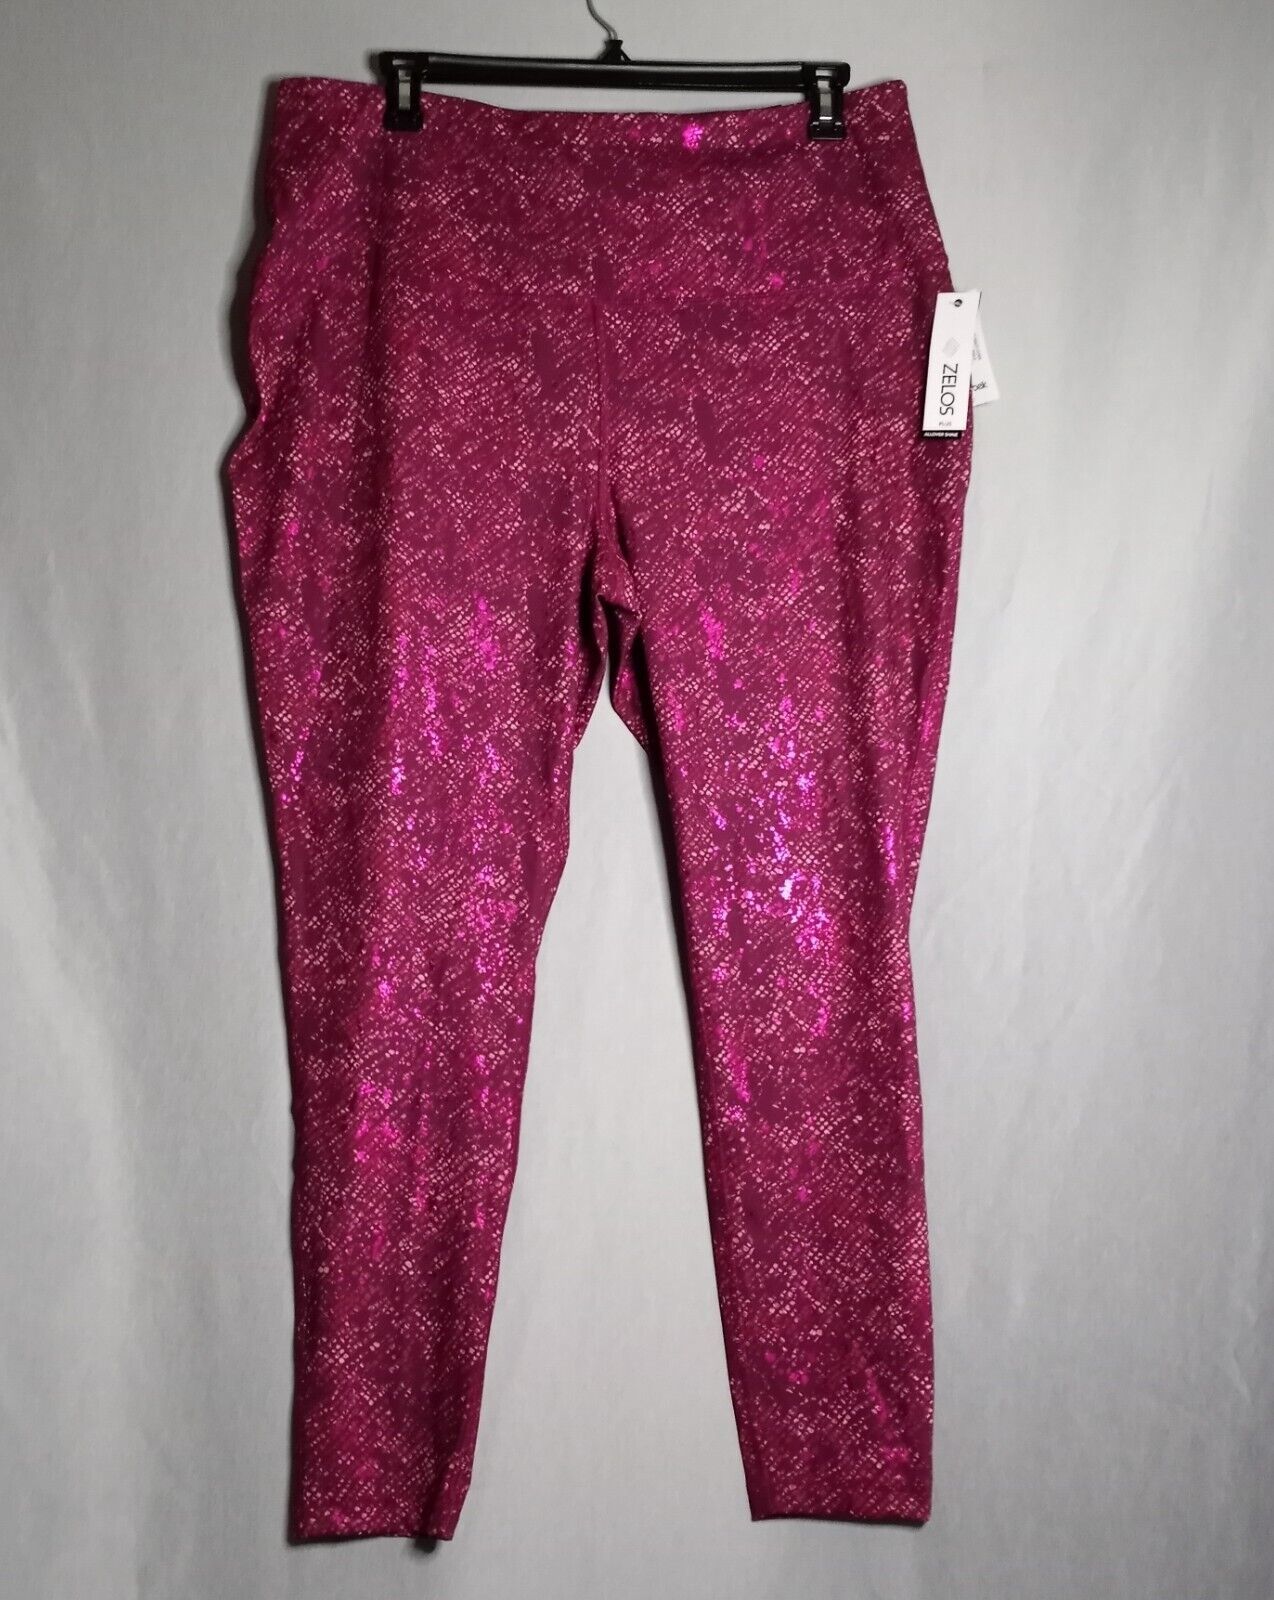 Primary image for Zelos Women's Athletic Tight Pink Snake Gym Workout Pants Plus Size 3X NWT